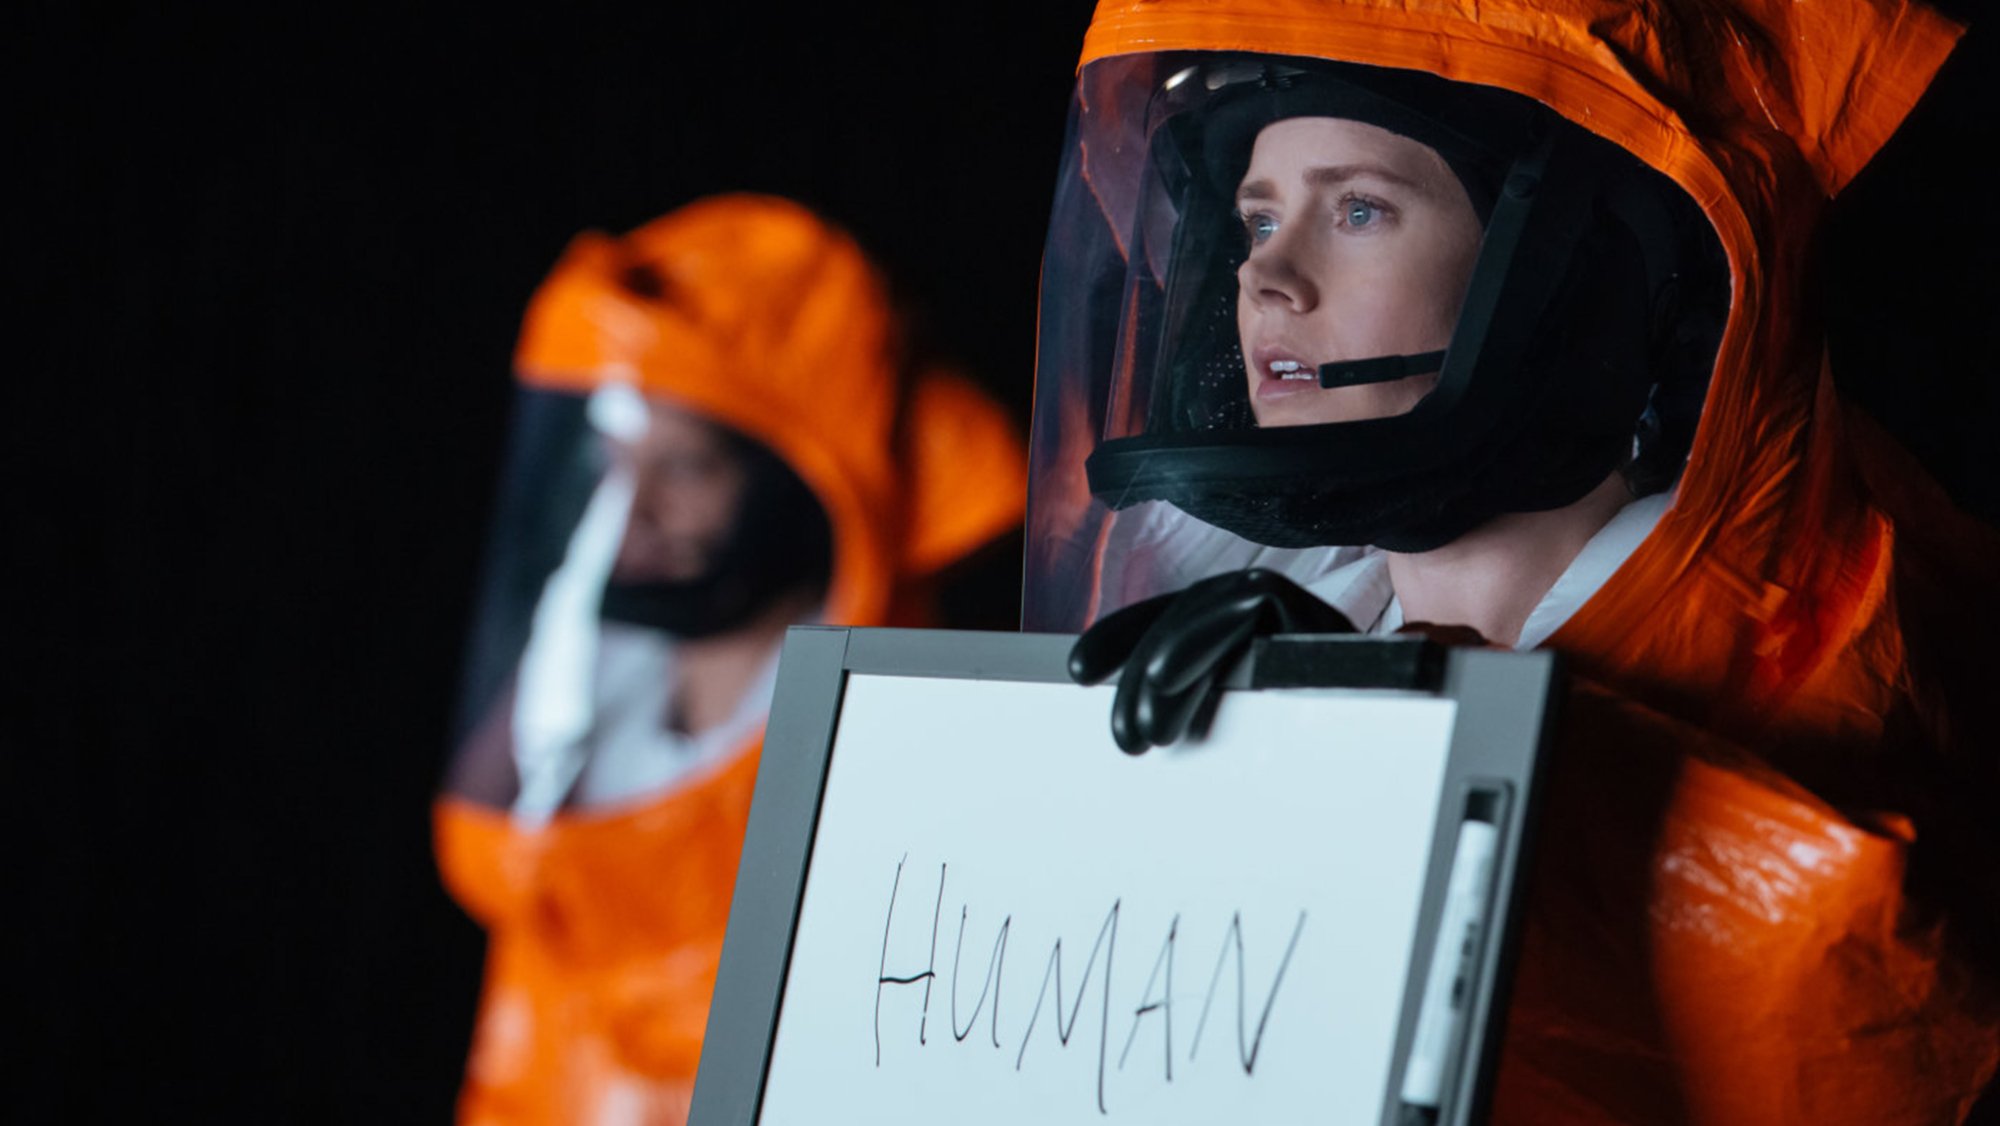 A woman in an orange hazmat suit holds up a whiteboard with "human" written on it